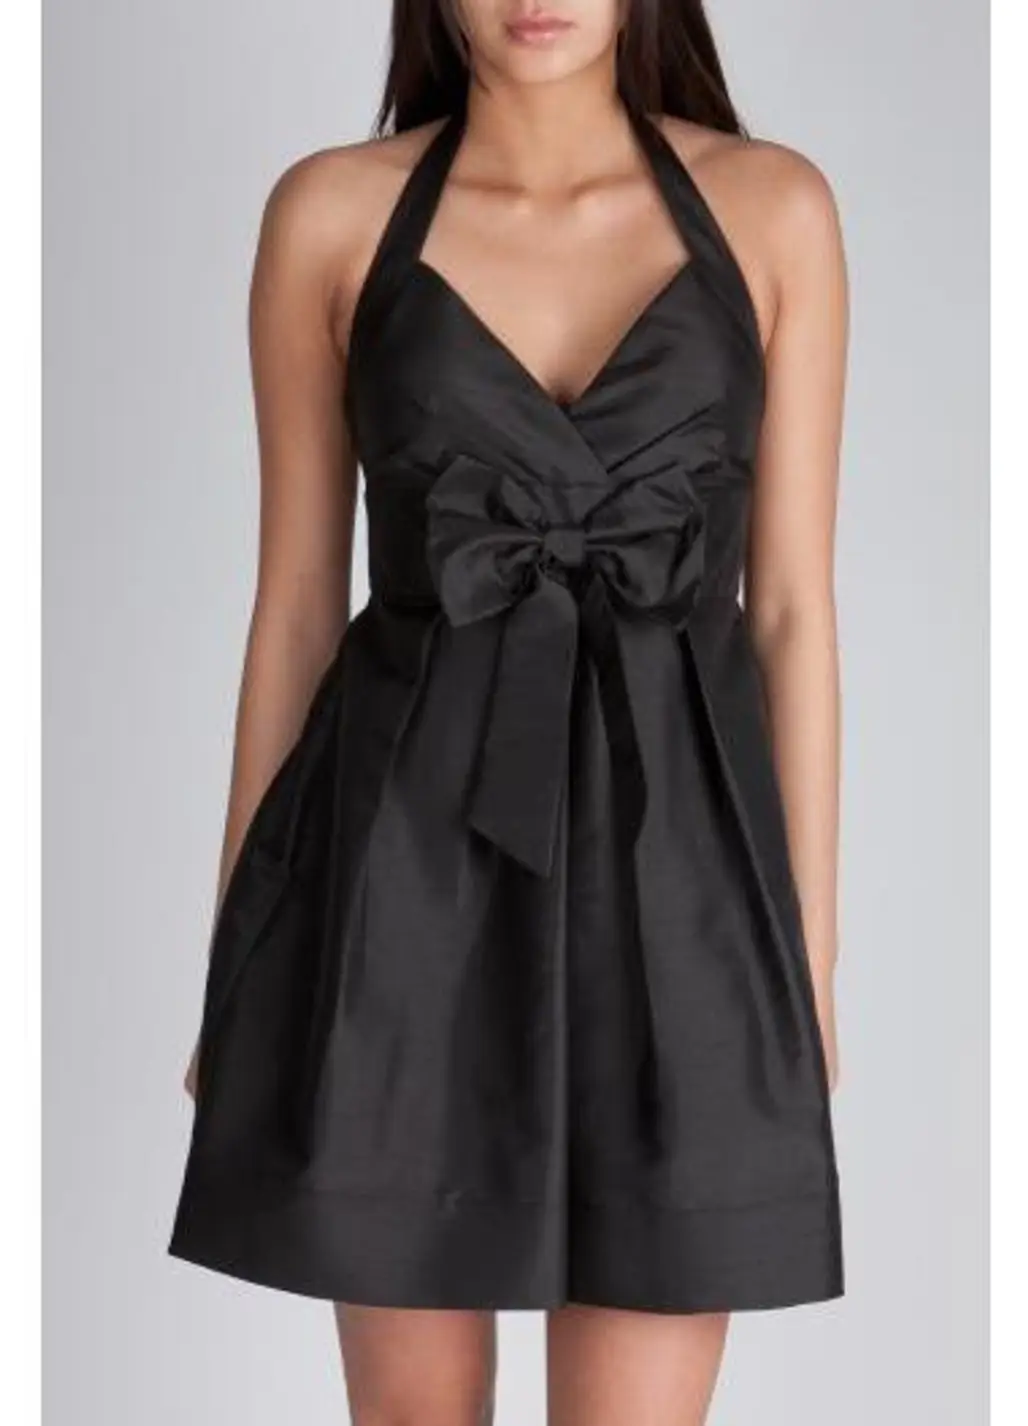 Black Bow Dress from Charlotte Russe - $38